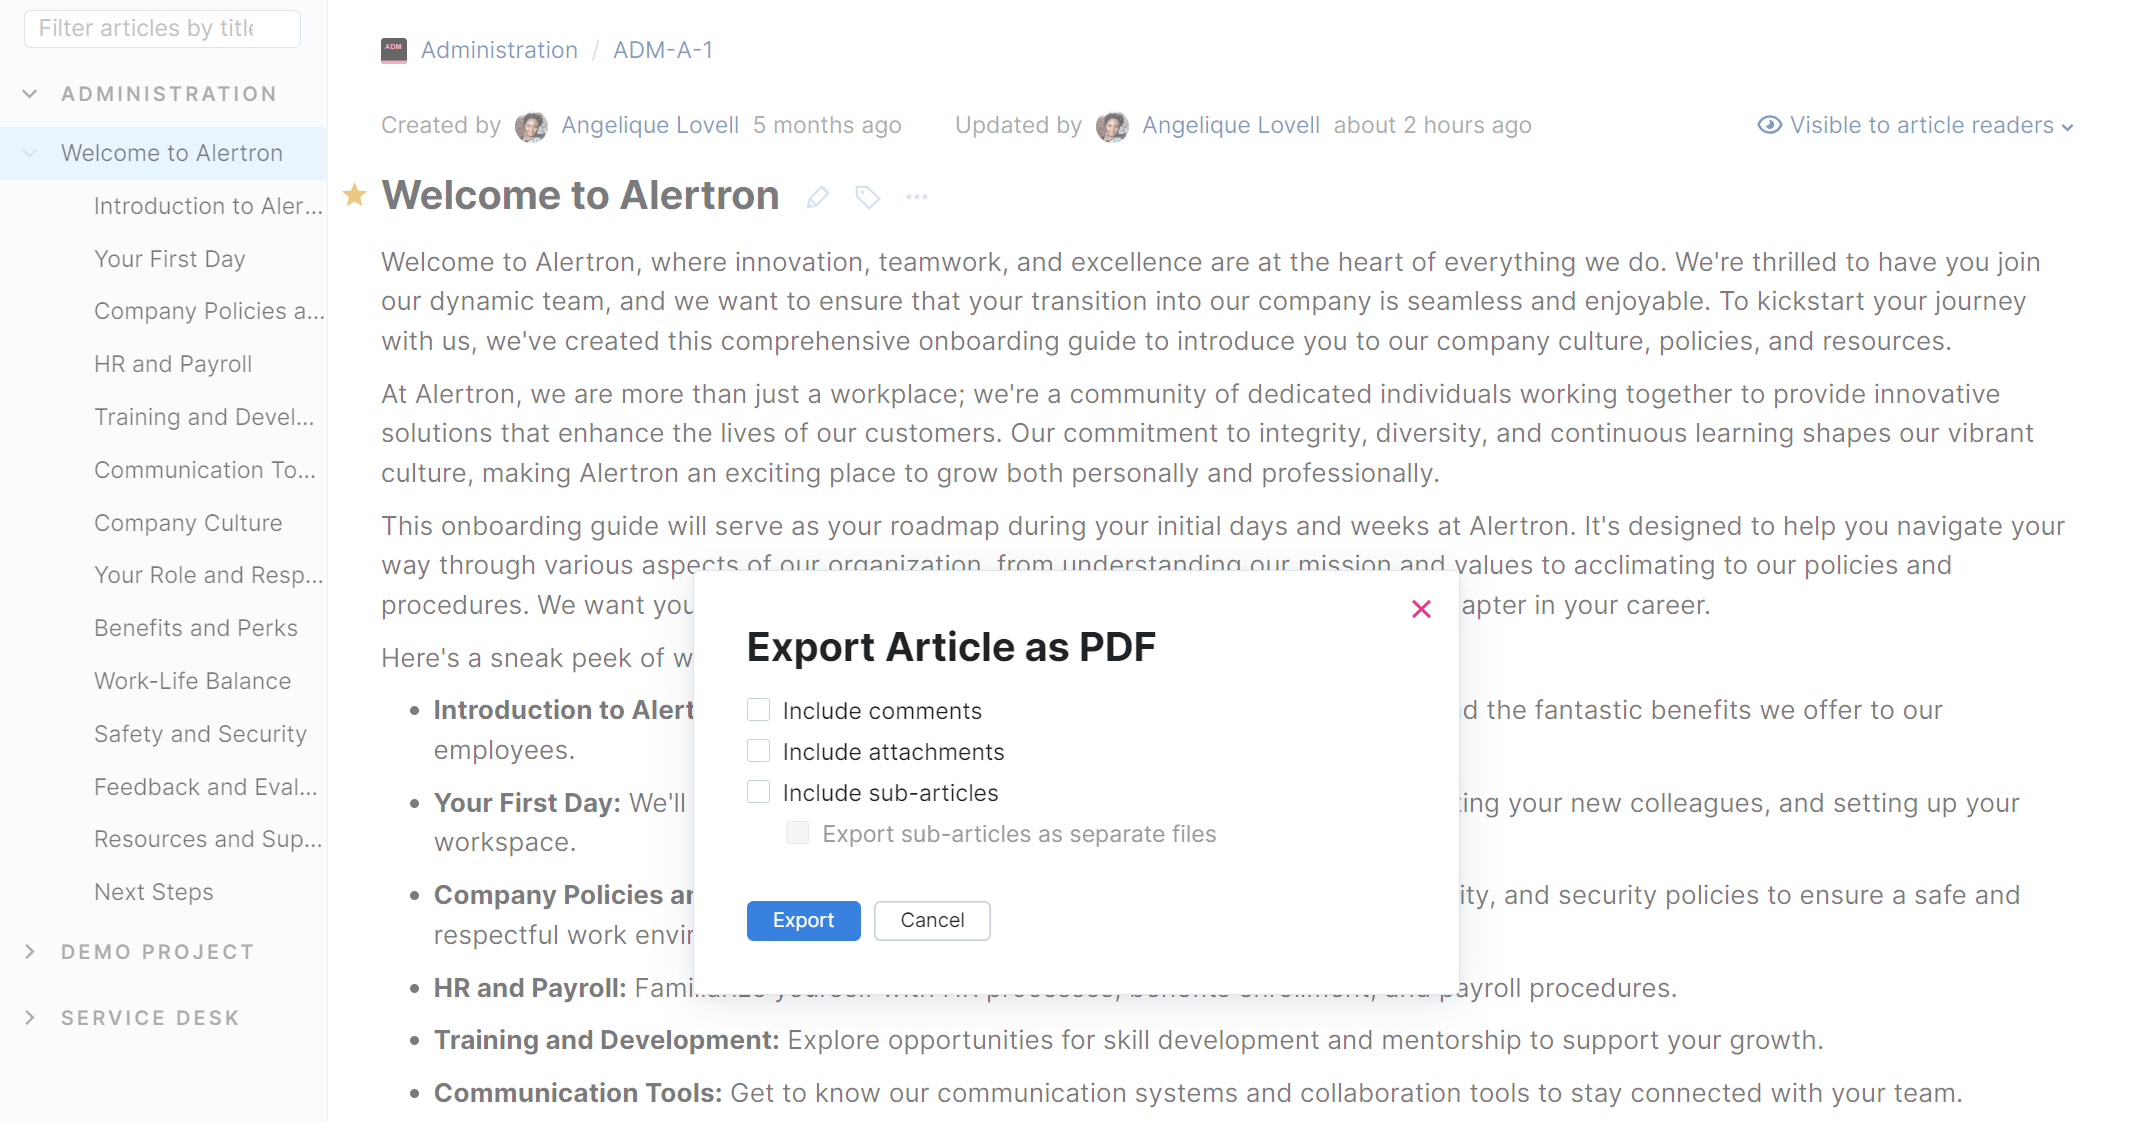 The Export Article as PDF dialog.